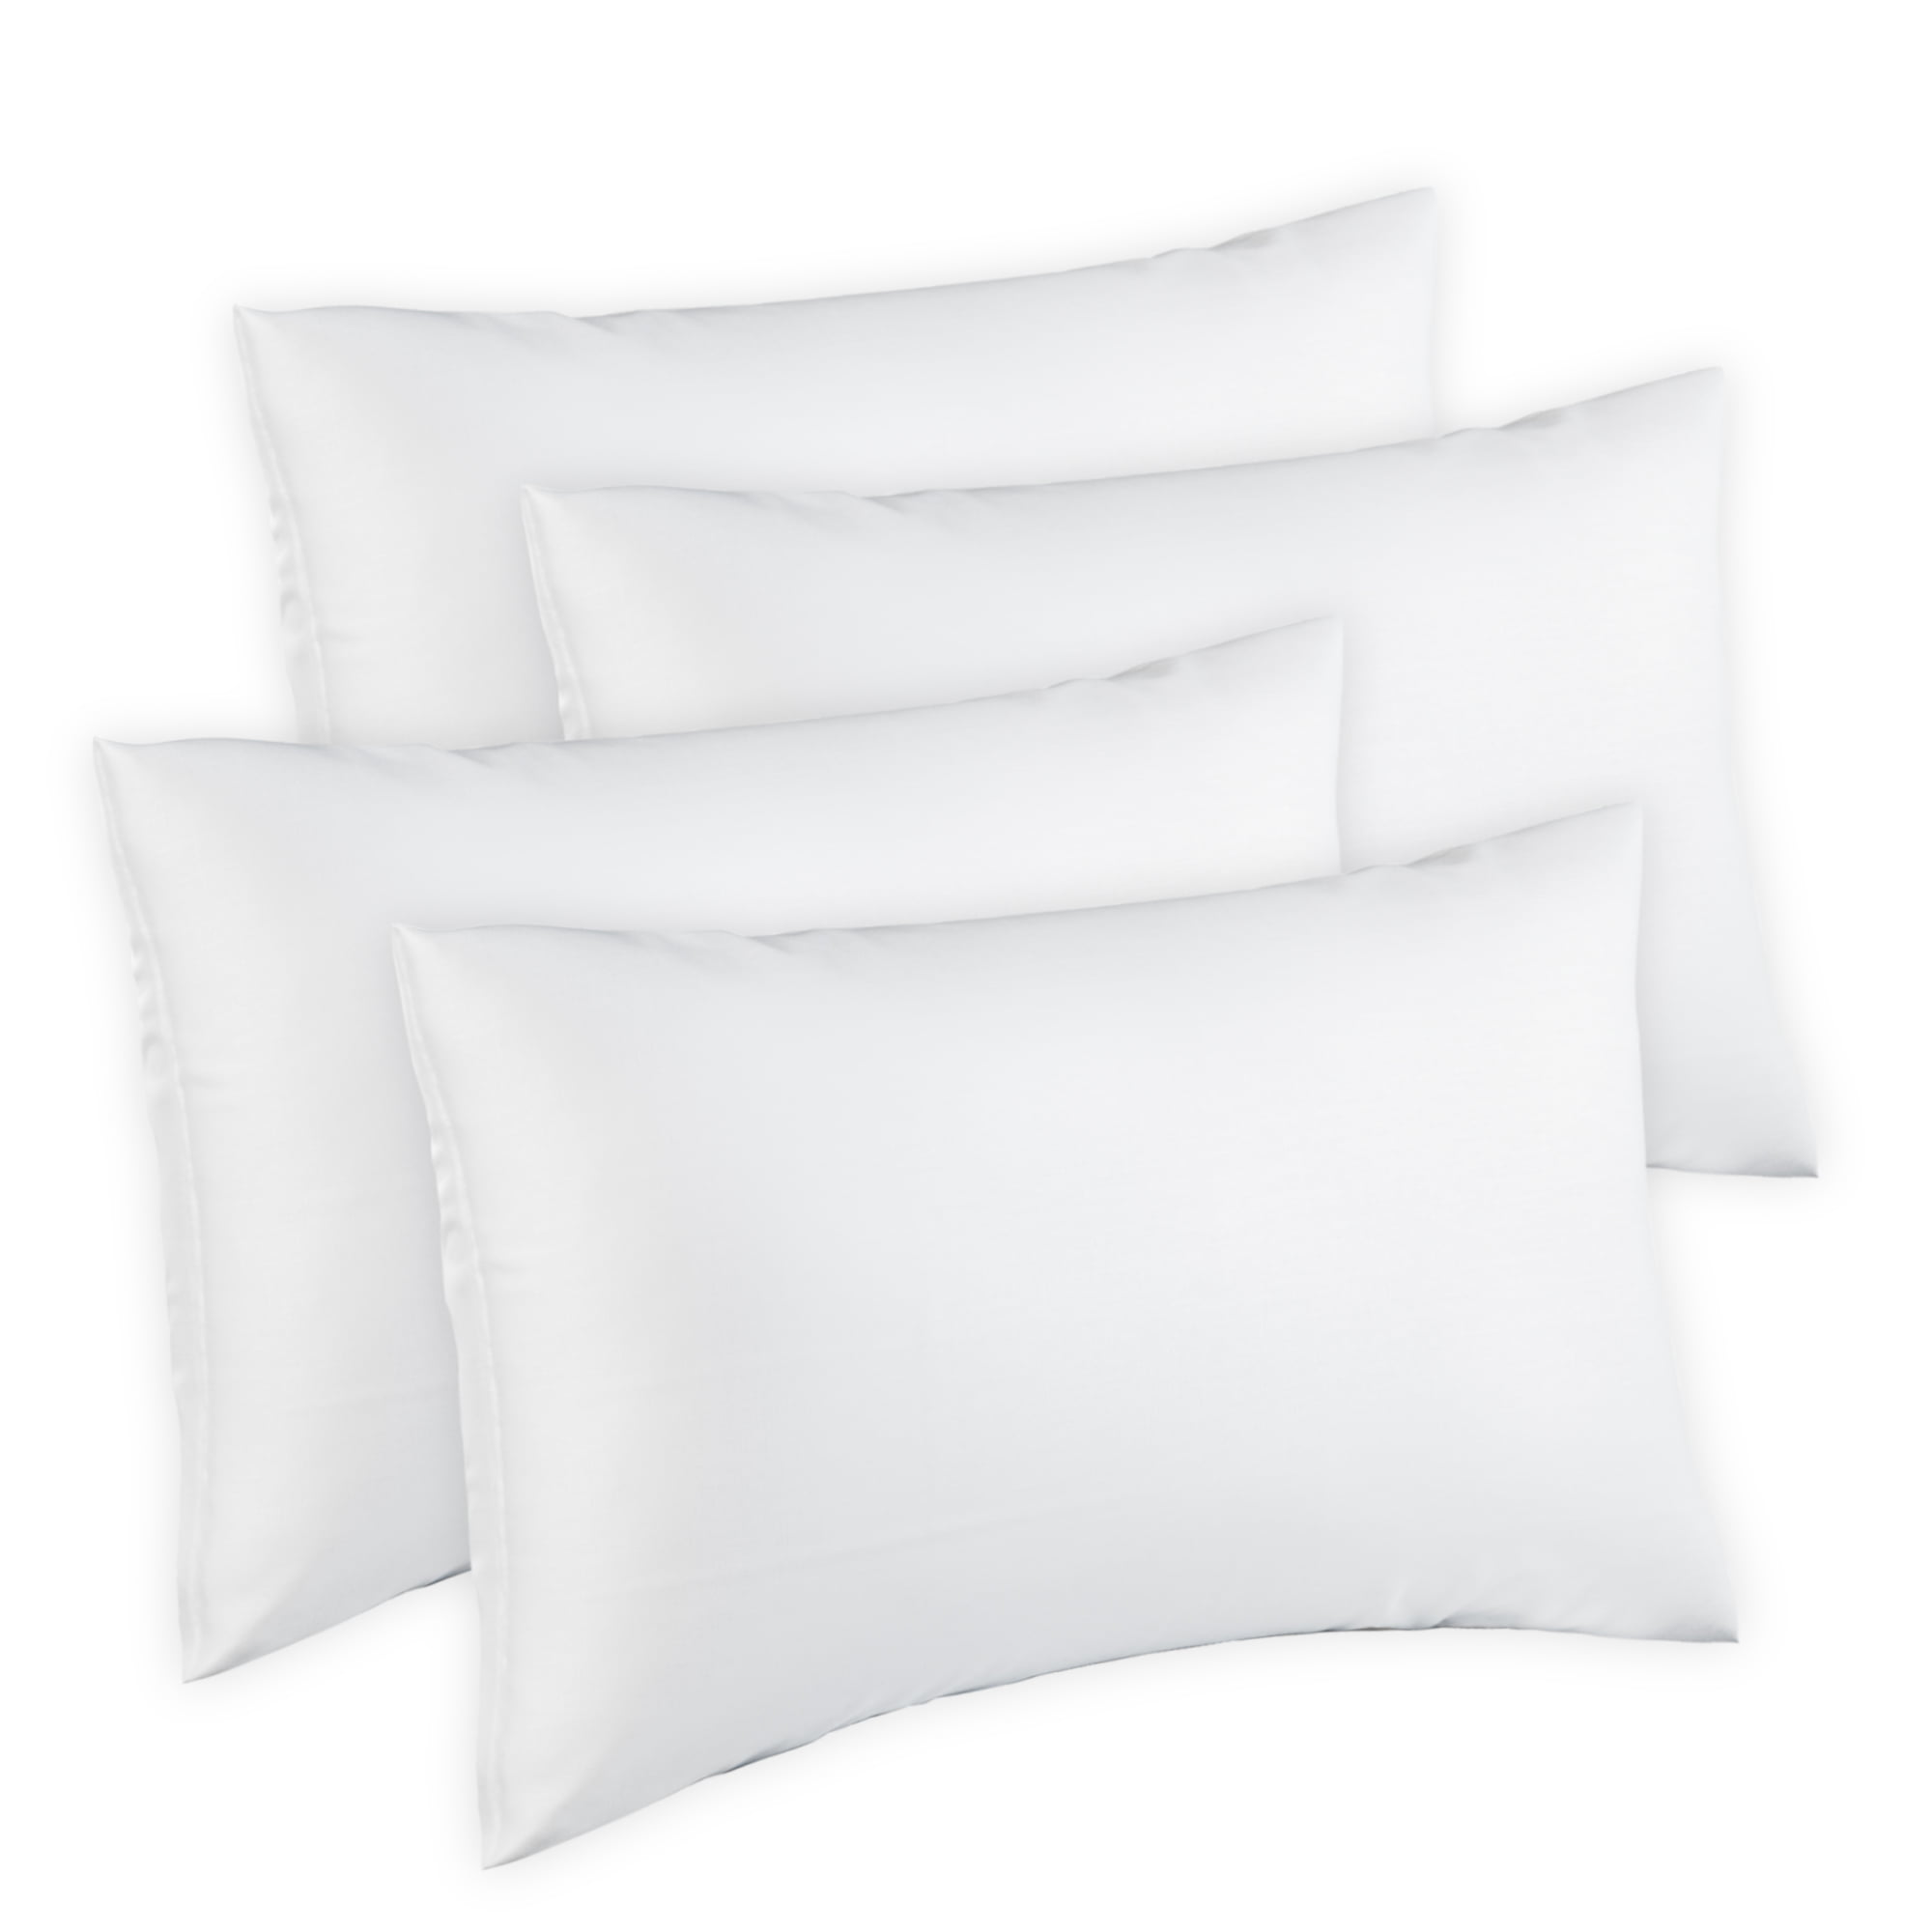 Queen Size 2 Pack Pillow Inserts Pillows for Sleeping 2 Pack Hypoallergenic Down Alternative Microfiber Soft Plush Washable Pillows Set of 2 Hotel Pillows for Side Back & Stomach Sleepers